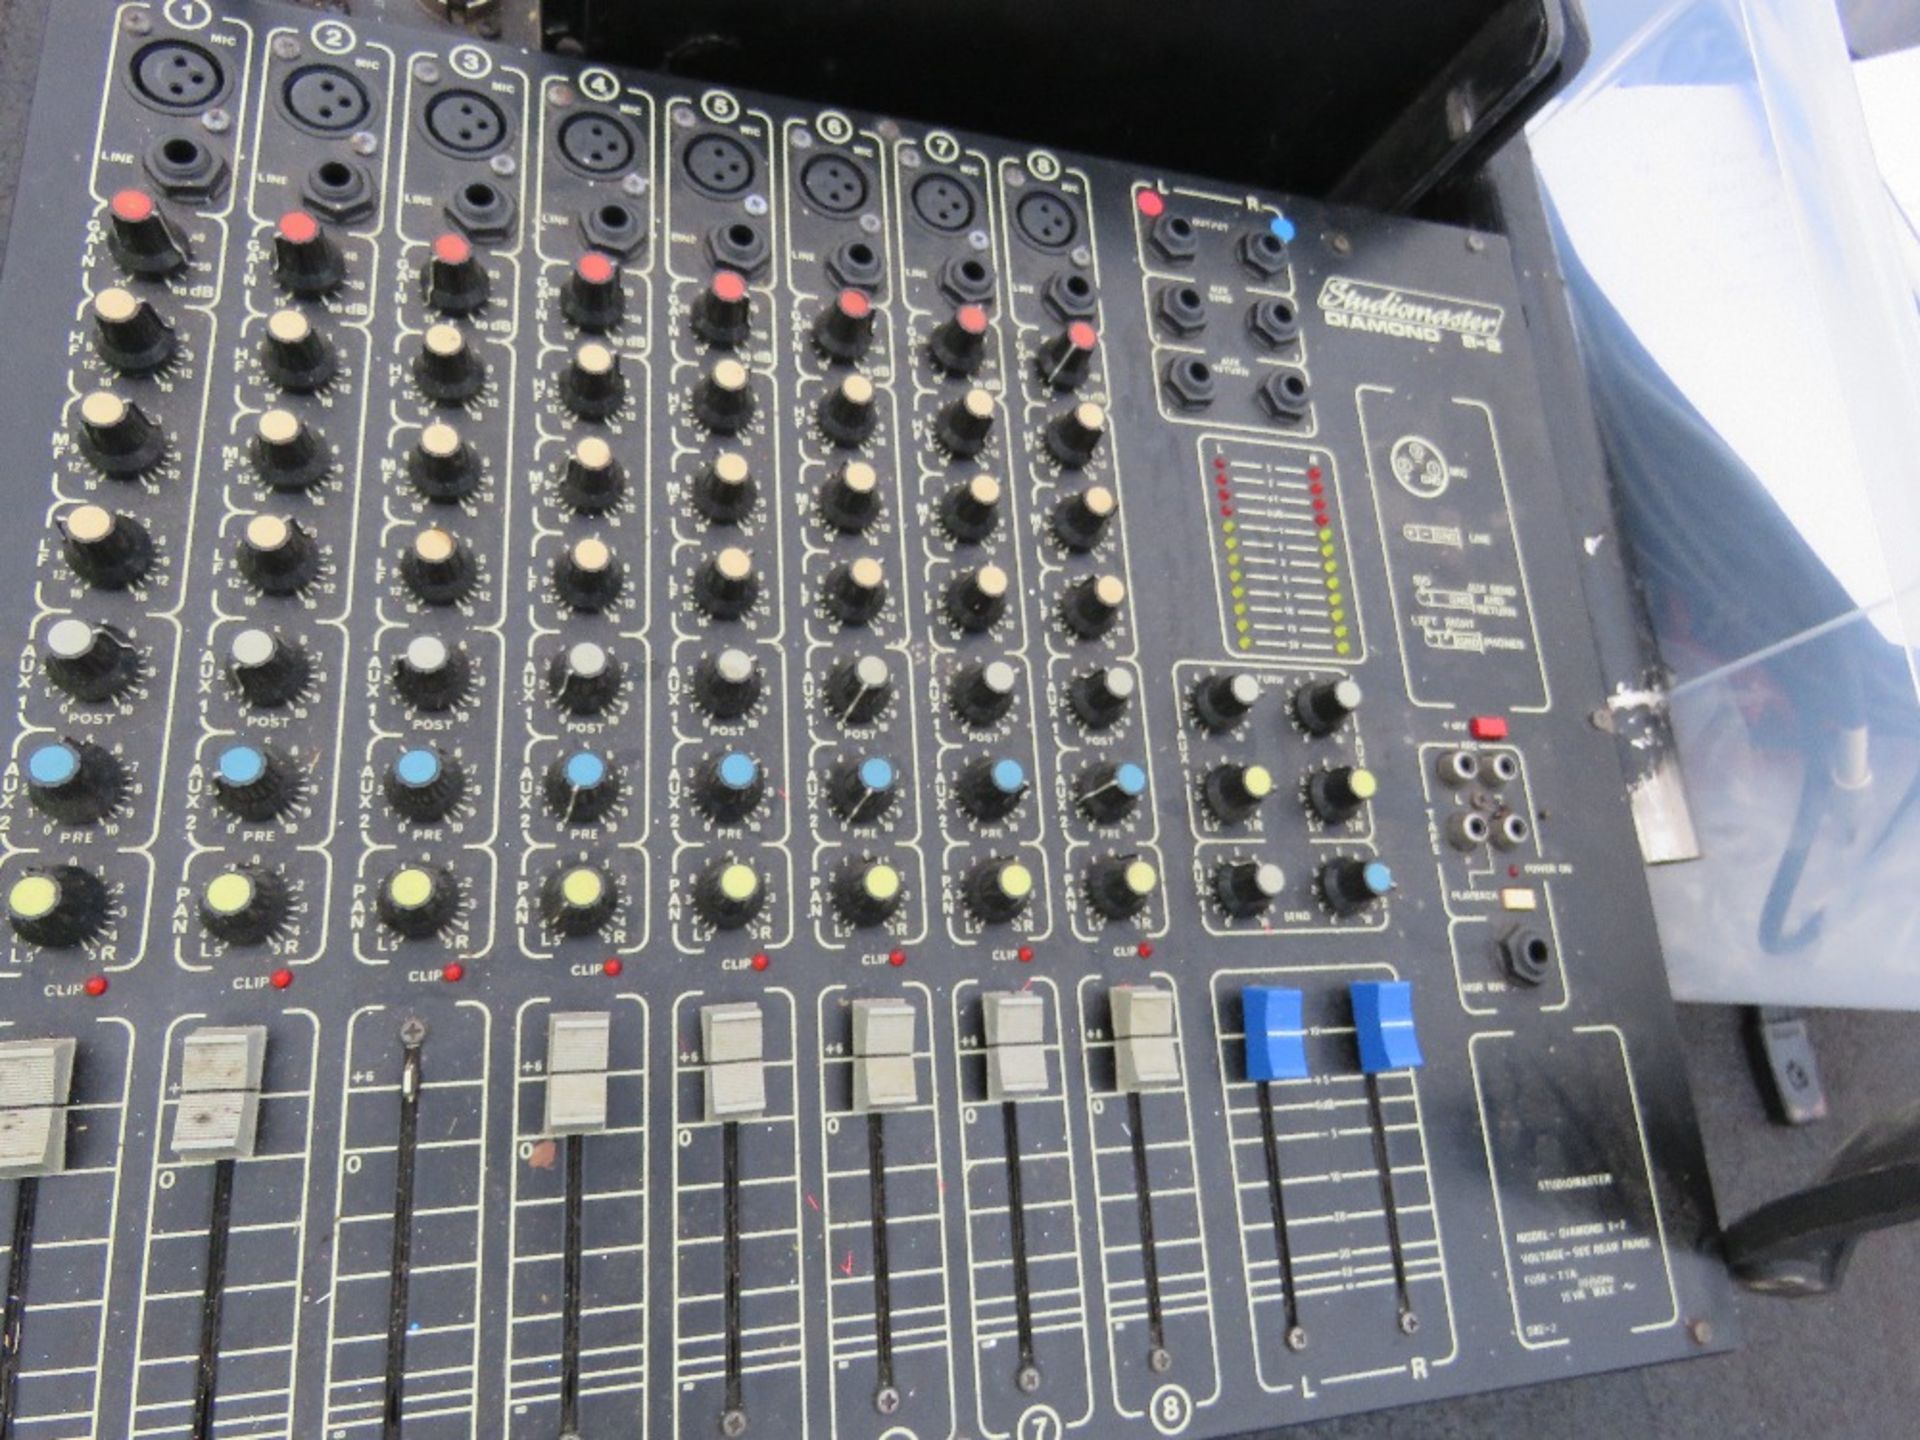 PUBLIC ADDRESS SYSTEM WITH 2 X MICROPHONES, CABLE, 4 X SPEAKERS AND A MIXER DECK. - Image 7 of 12